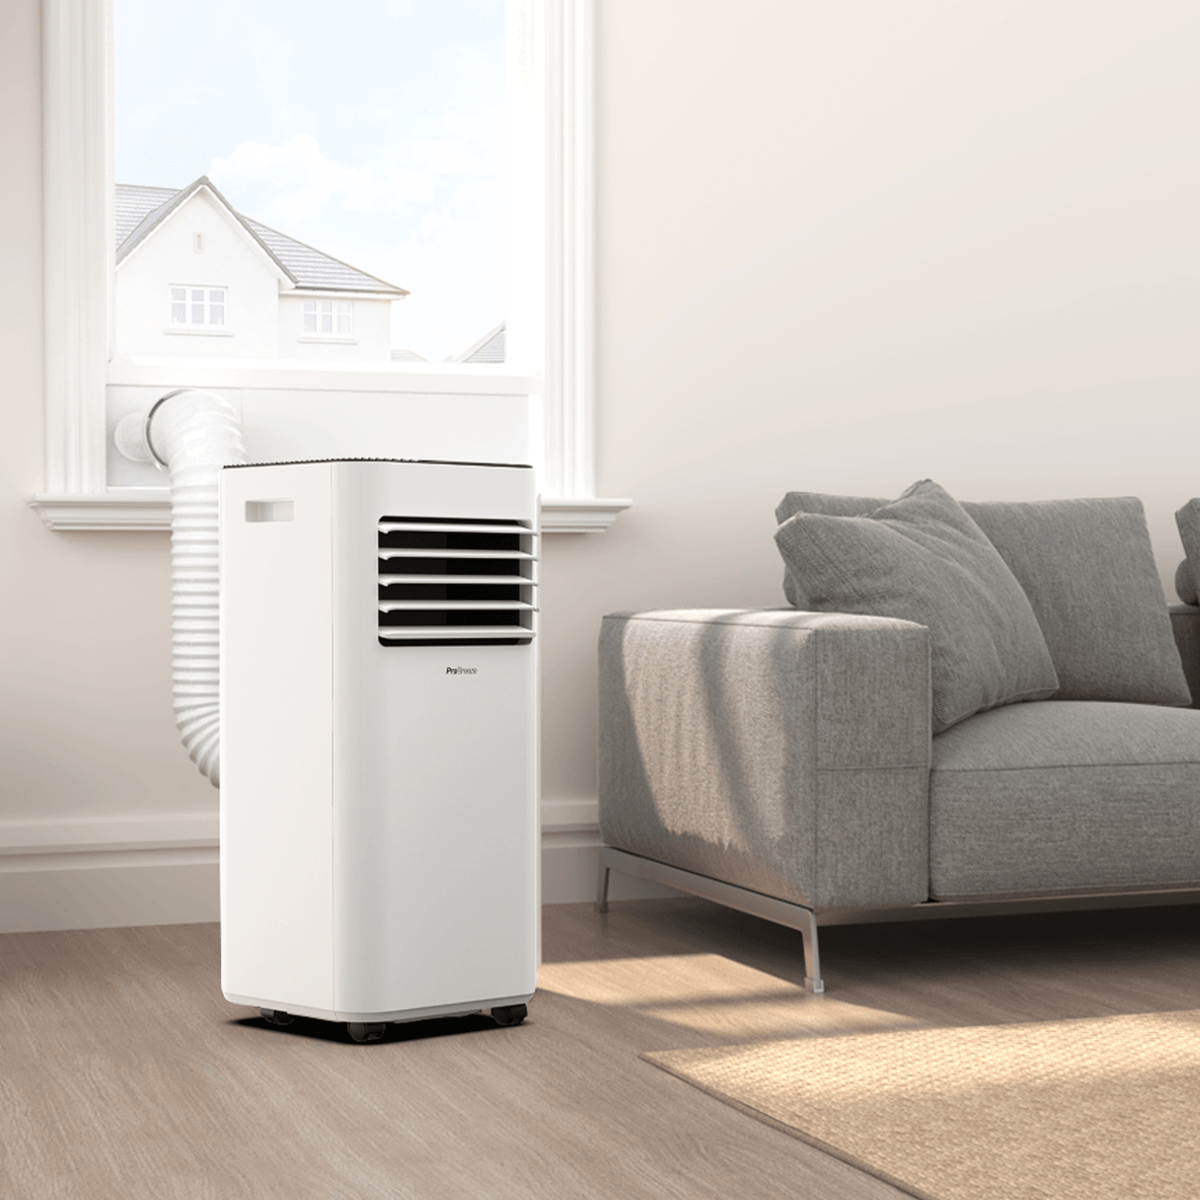 7000 BTU 4-in-1 Portable Air Conditioner with Dehumidifying Function and Temperature